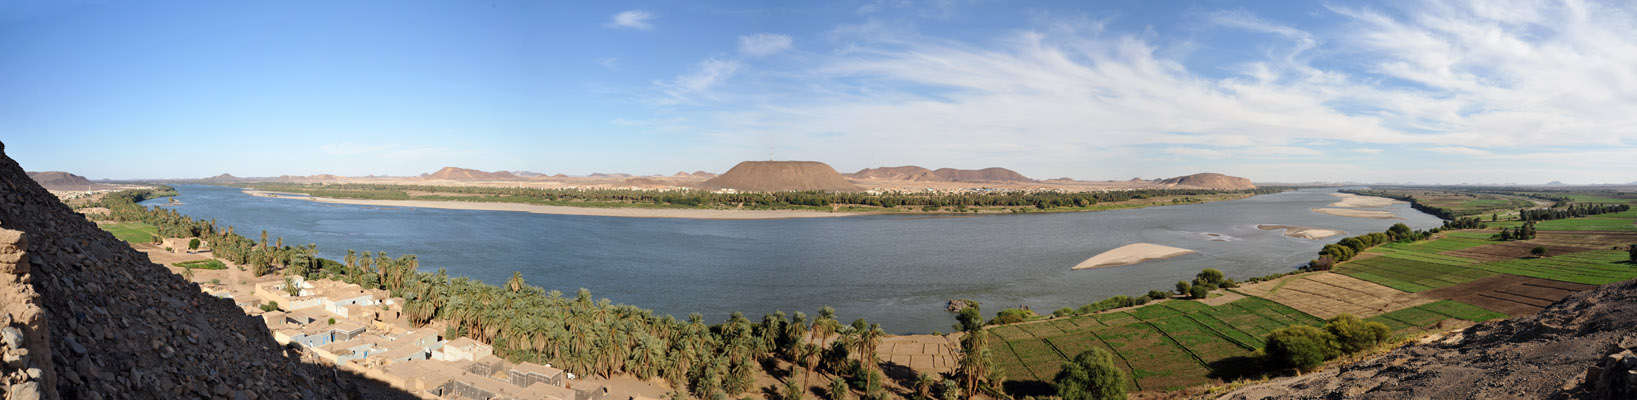 Panoramic view of the Nile from Jebel Sesi